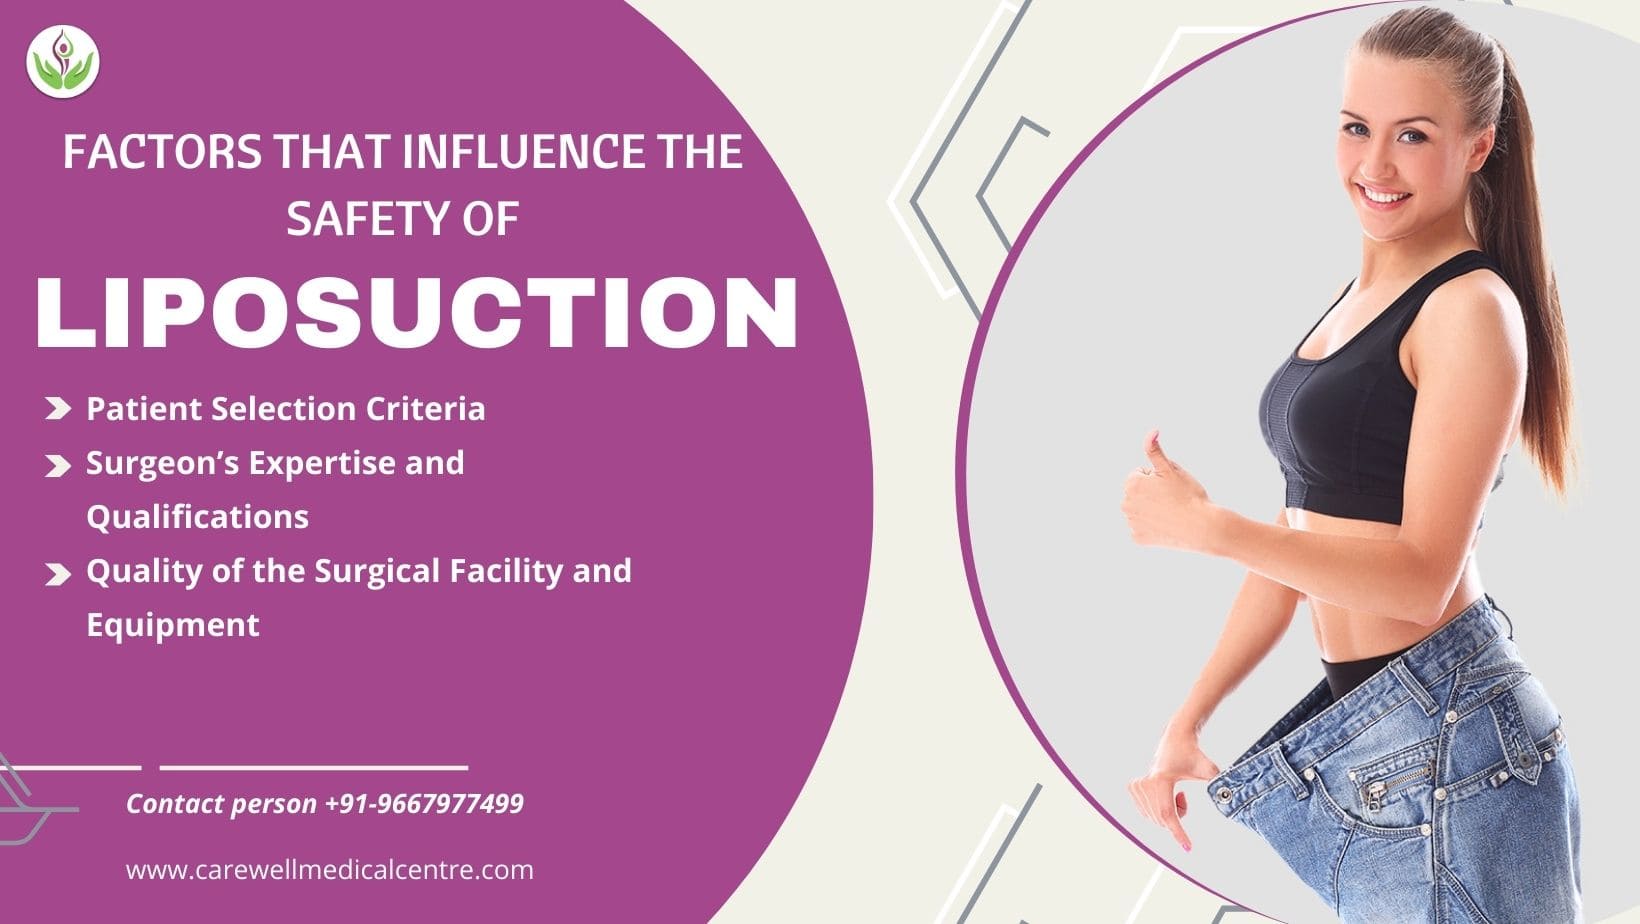 Factors that Influence the Safety of Liposuction